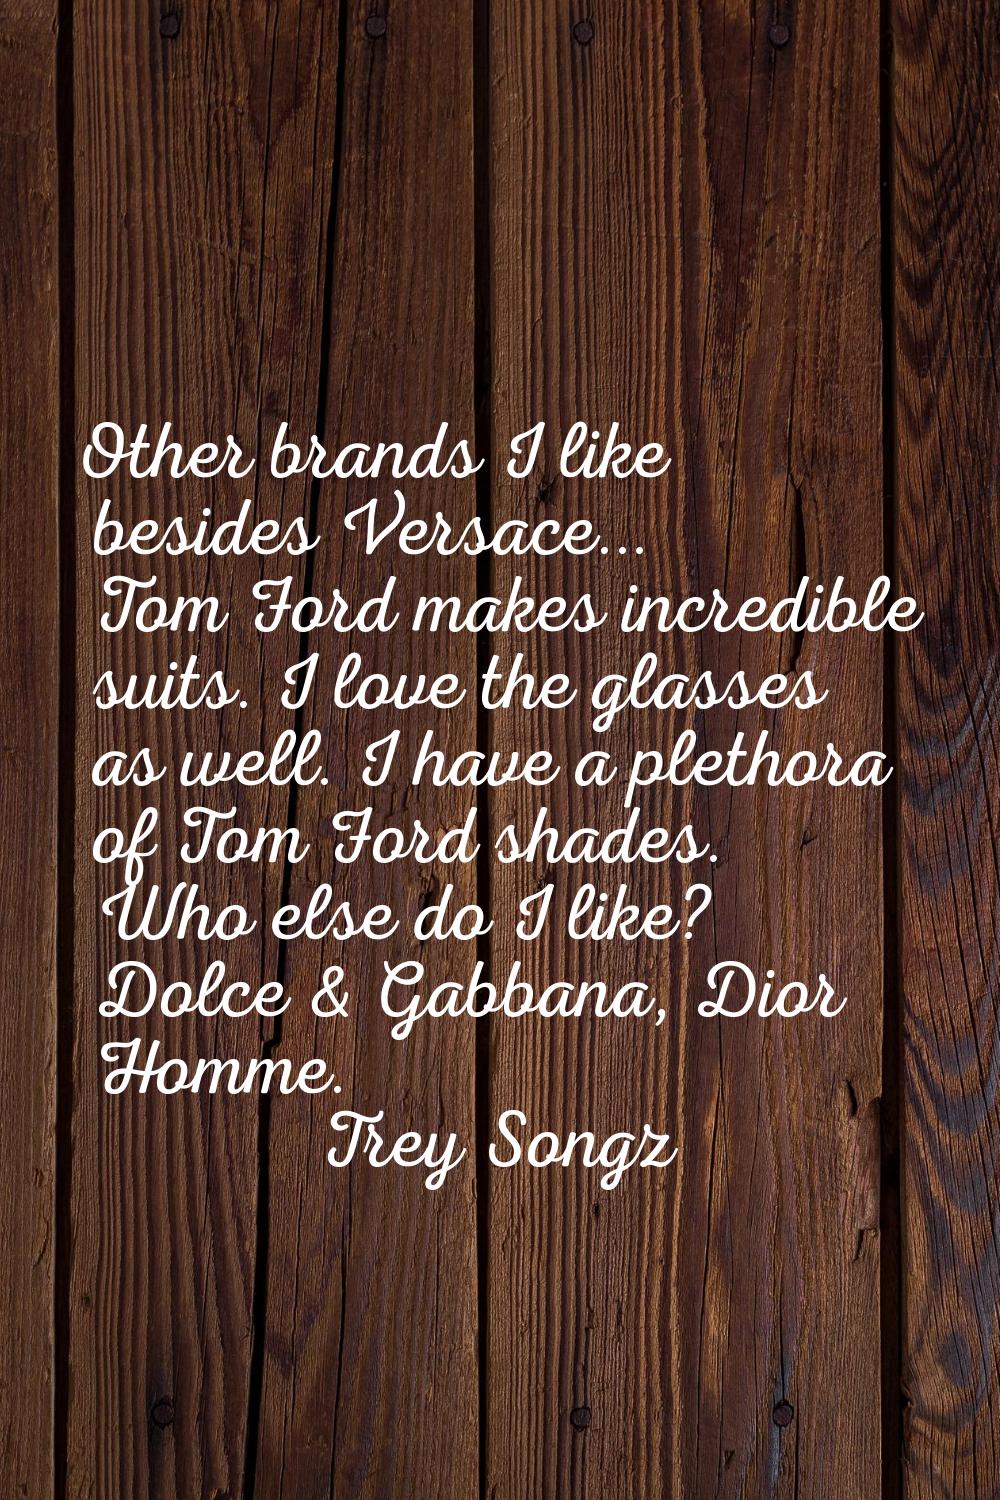 Other brands I like besides Versace... Tom Ford makes incredible suits. I love the glasses as well.